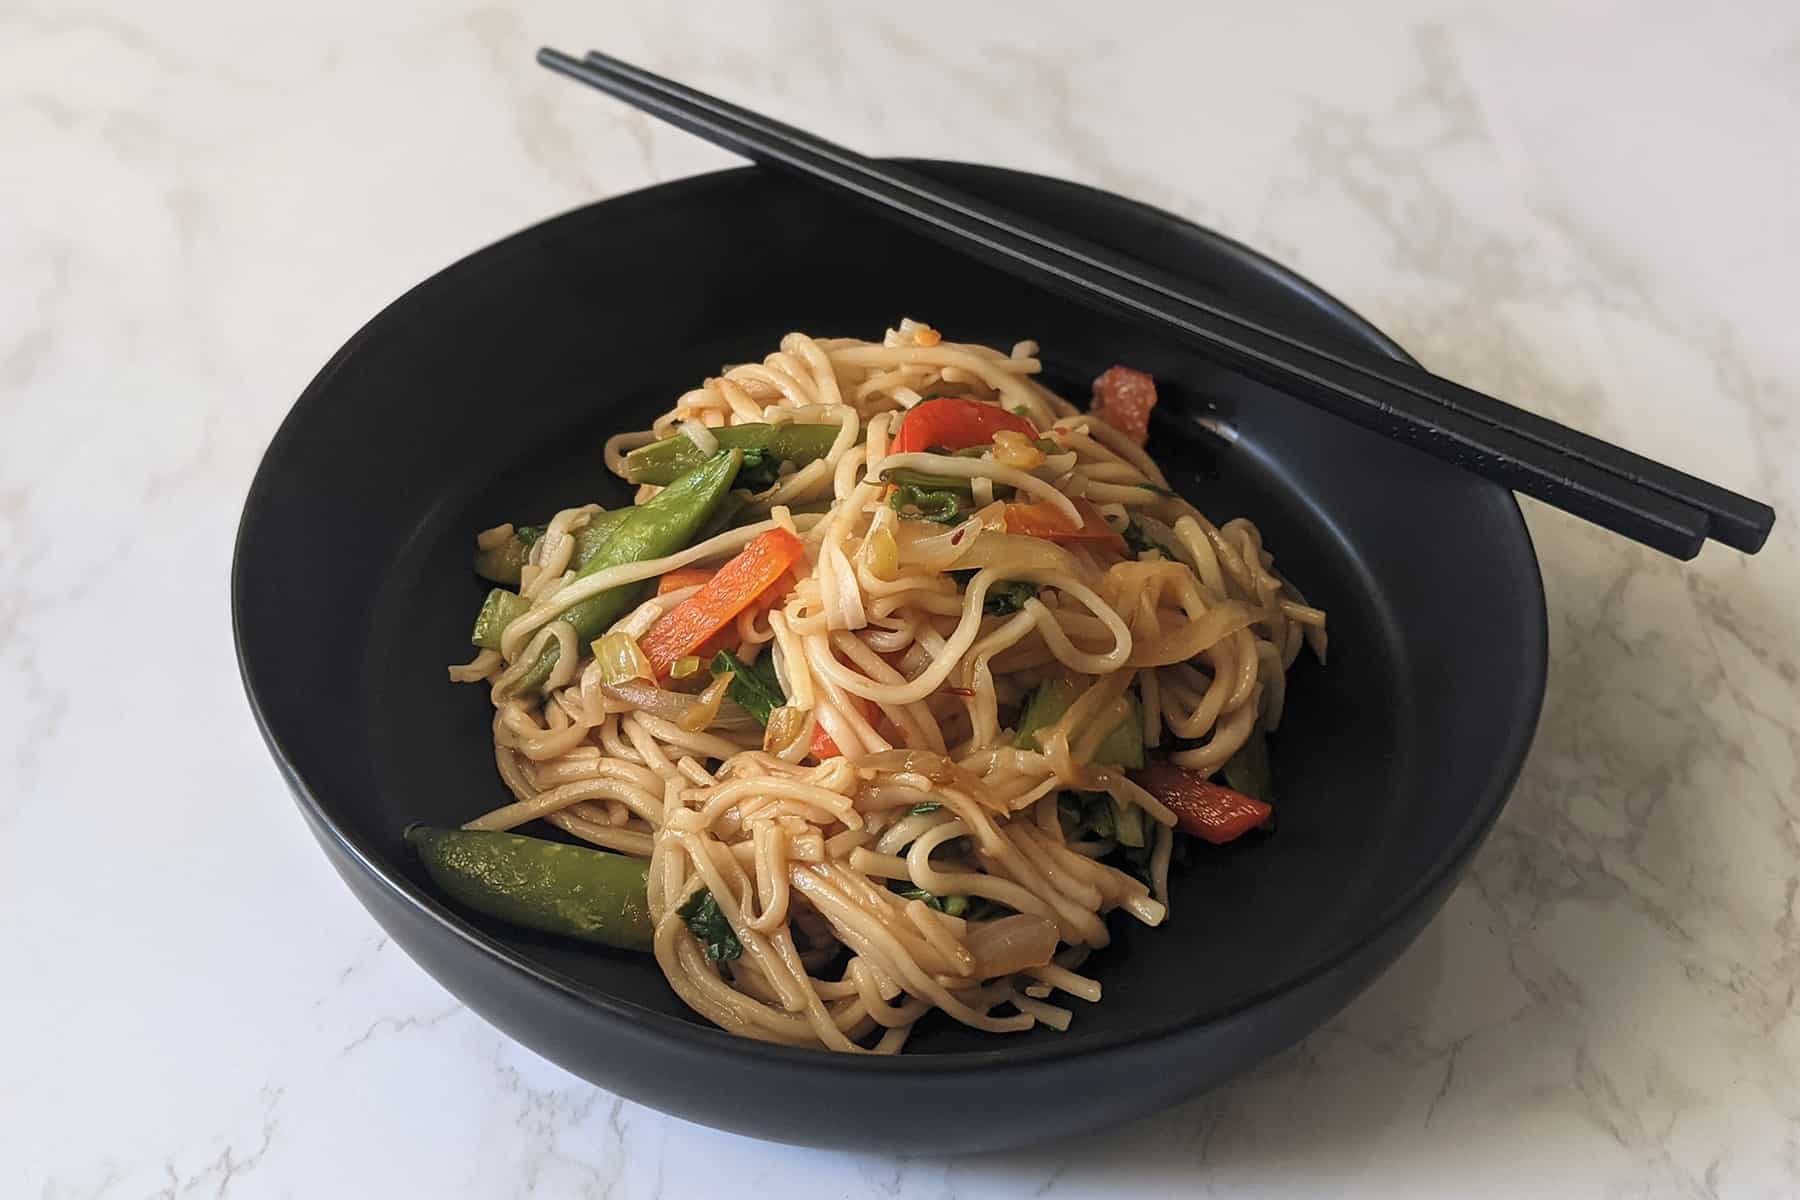 Udon stir fry with vegetables in a serving bowl with chopsticks